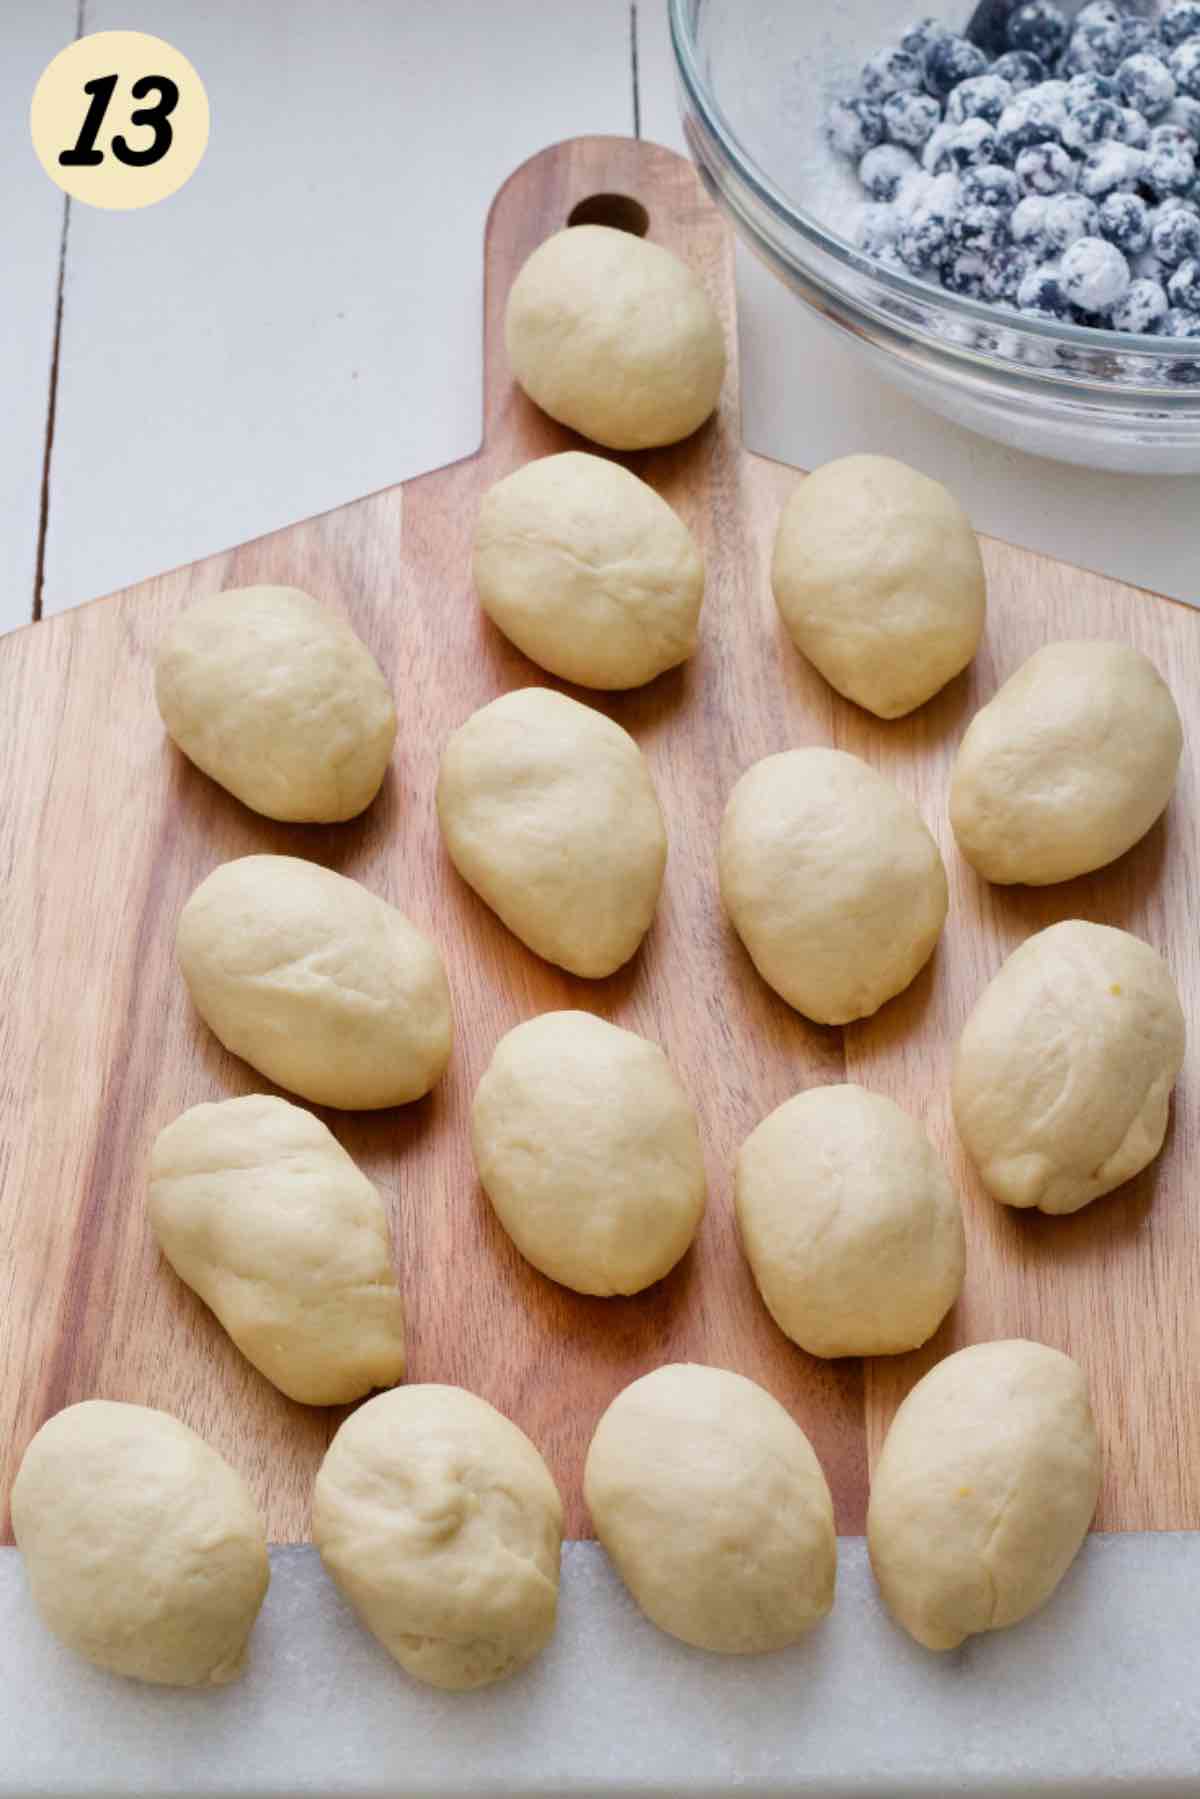 16 pieces of dough ready for filling.